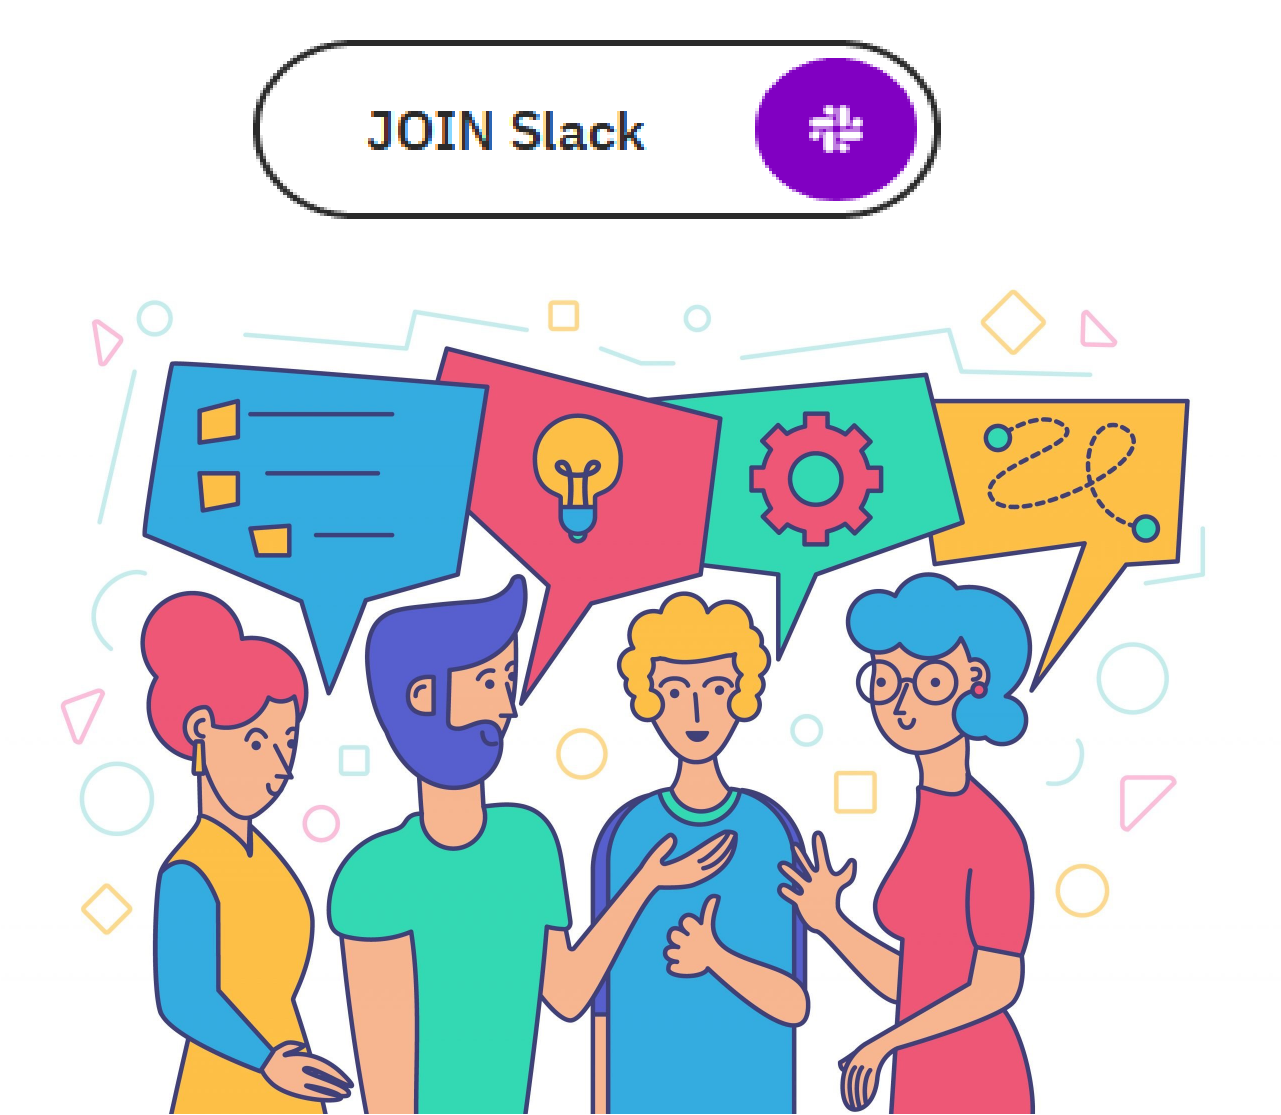 _img/0-welcome/joinslack.png